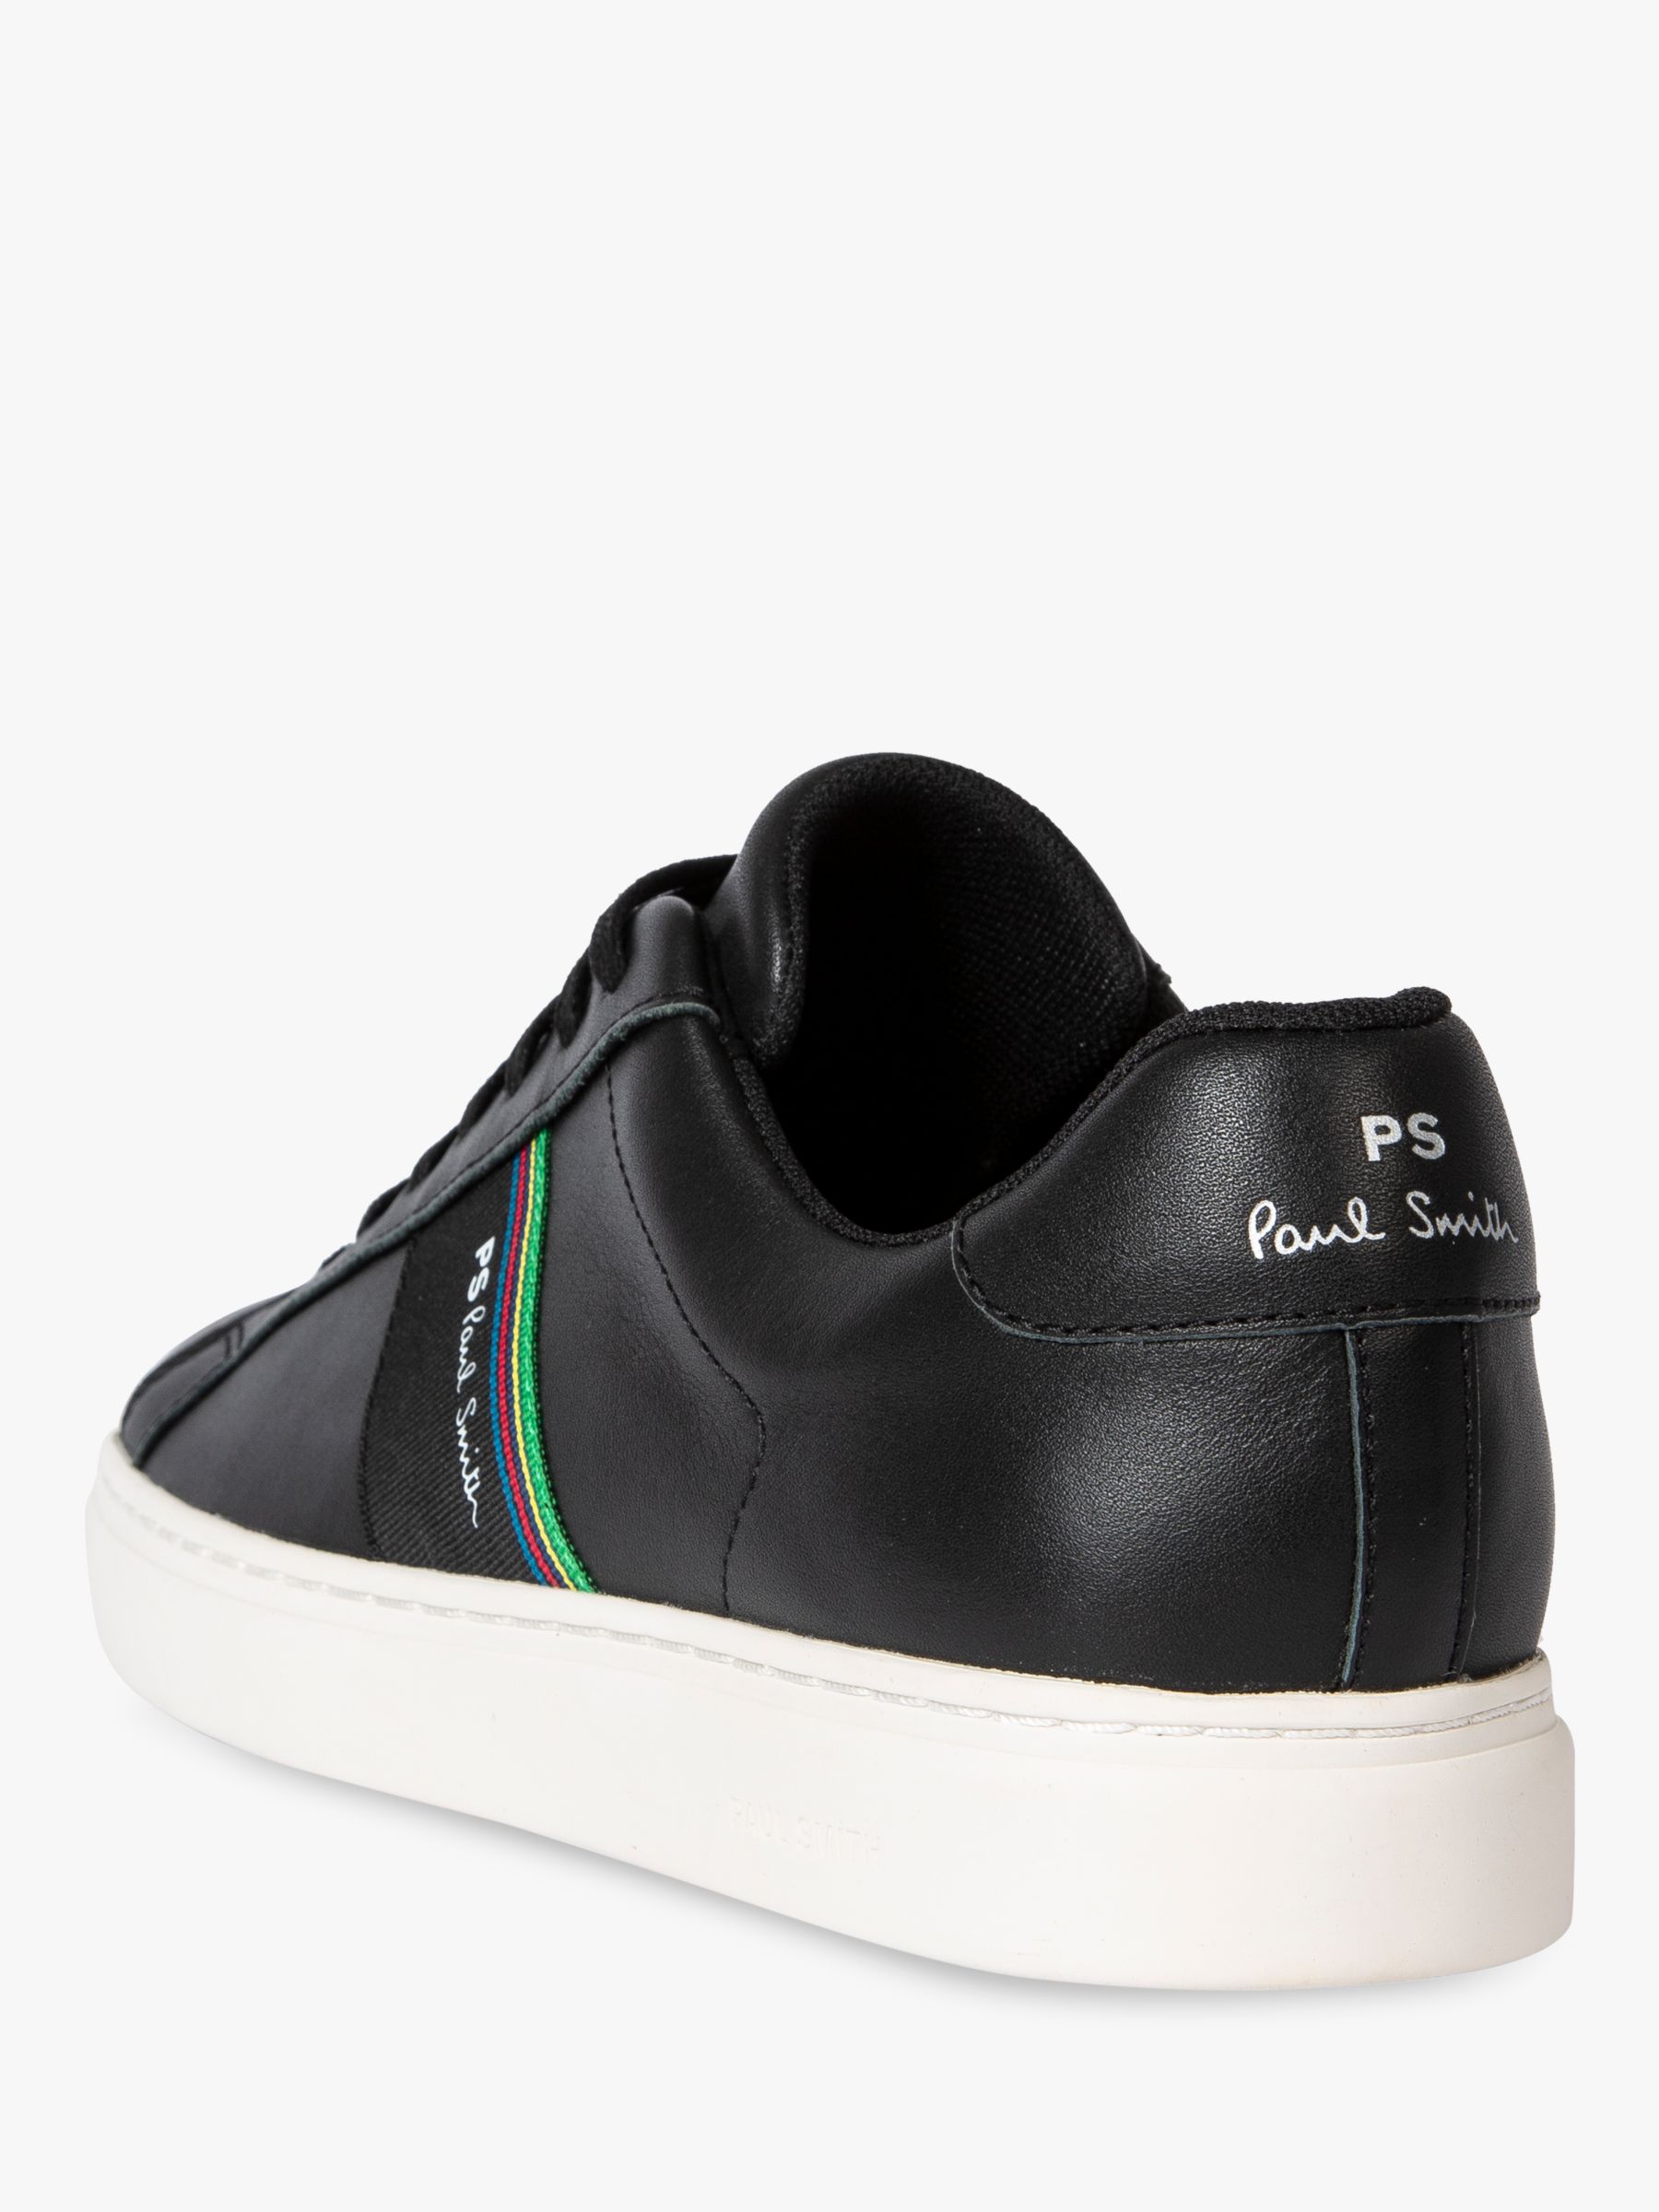 paul smith black leather trainers Online